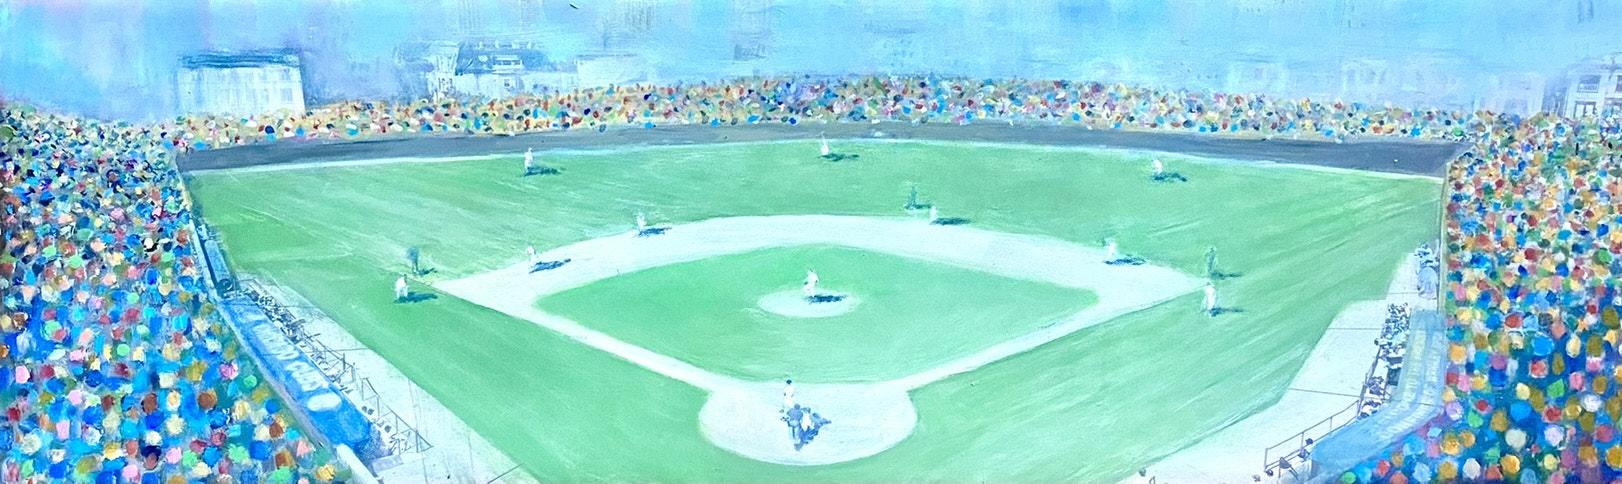 Take Me Out to the Ball Game by Lisa Thoren